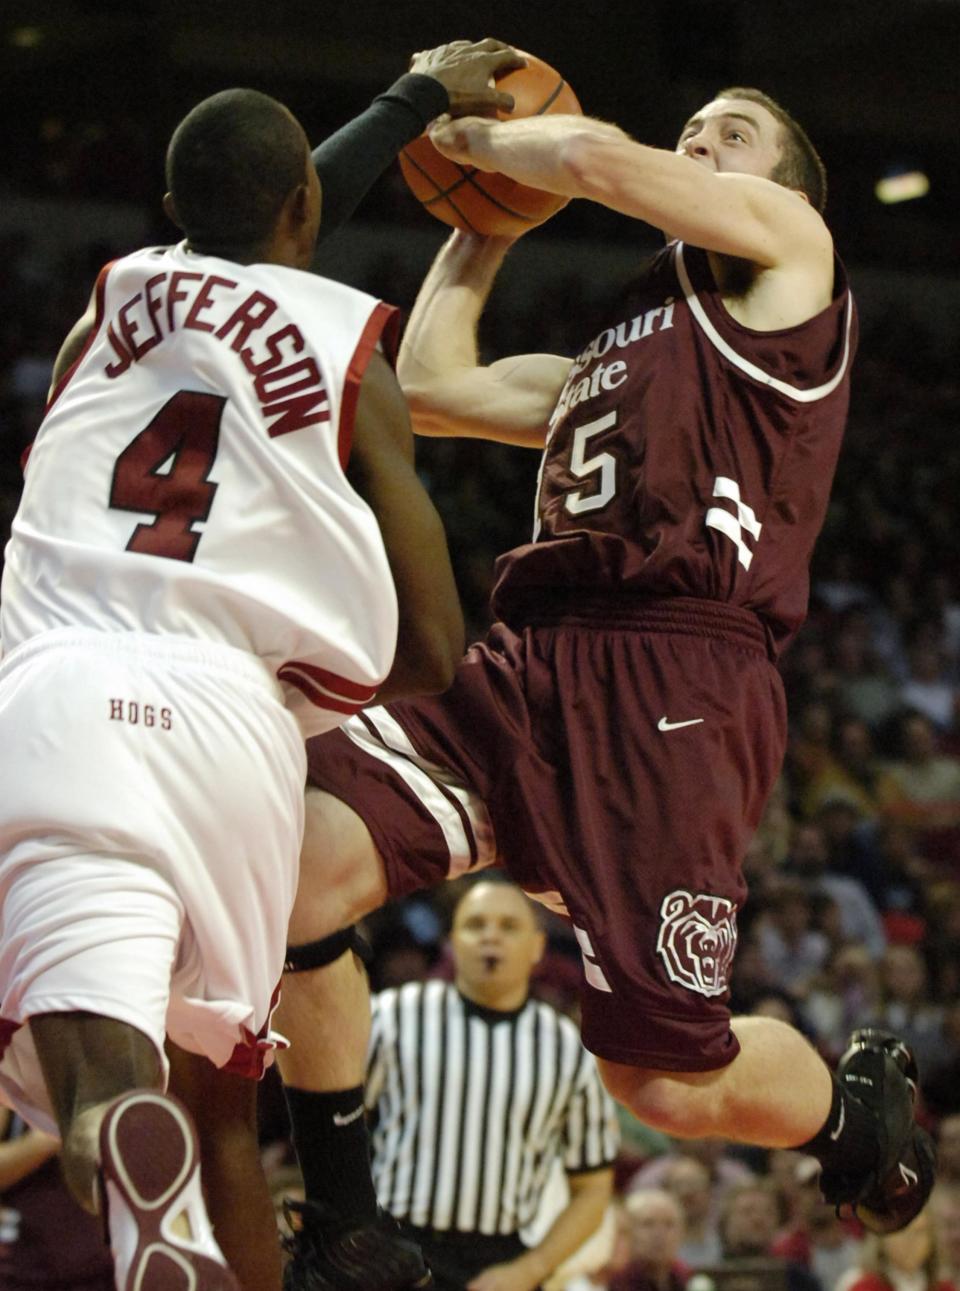 Arkansas' Dontell Jefferson (4) blocks a shot by Missouri State's Blake Ahearn, right, in the second half of an NCAA basketball game in Fayetteville, Ark., Thursday, Dec. 15, 2005. Ahearn scored a team-high 16 points in a losing effort as Arkansas won, 79-75.